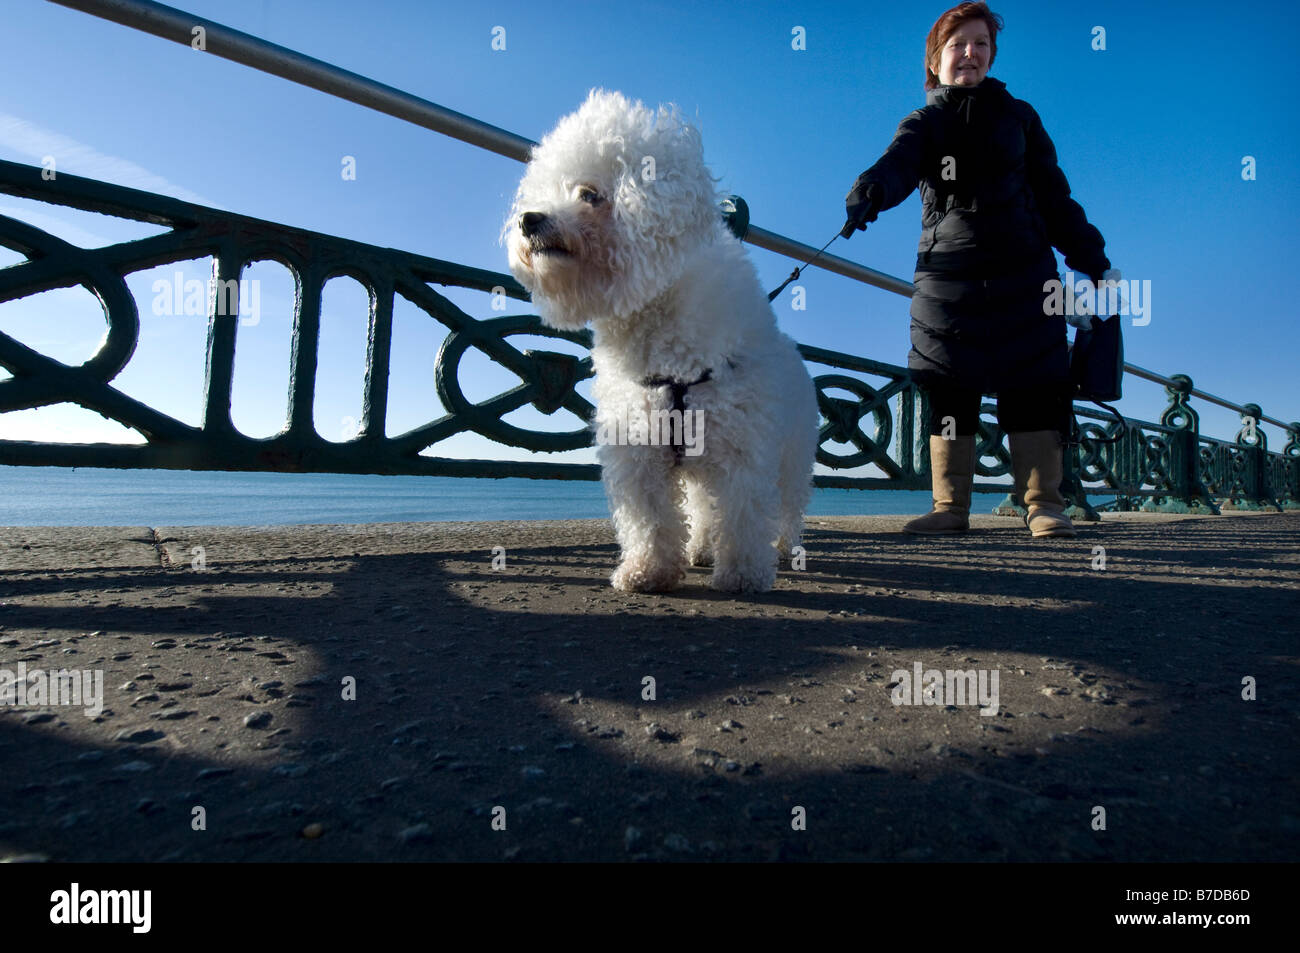 A pedigree Bichon Frise whose grandfather won the Crufts dog show best in show takes a walk on Brighton and Hove seafront Stock Photo